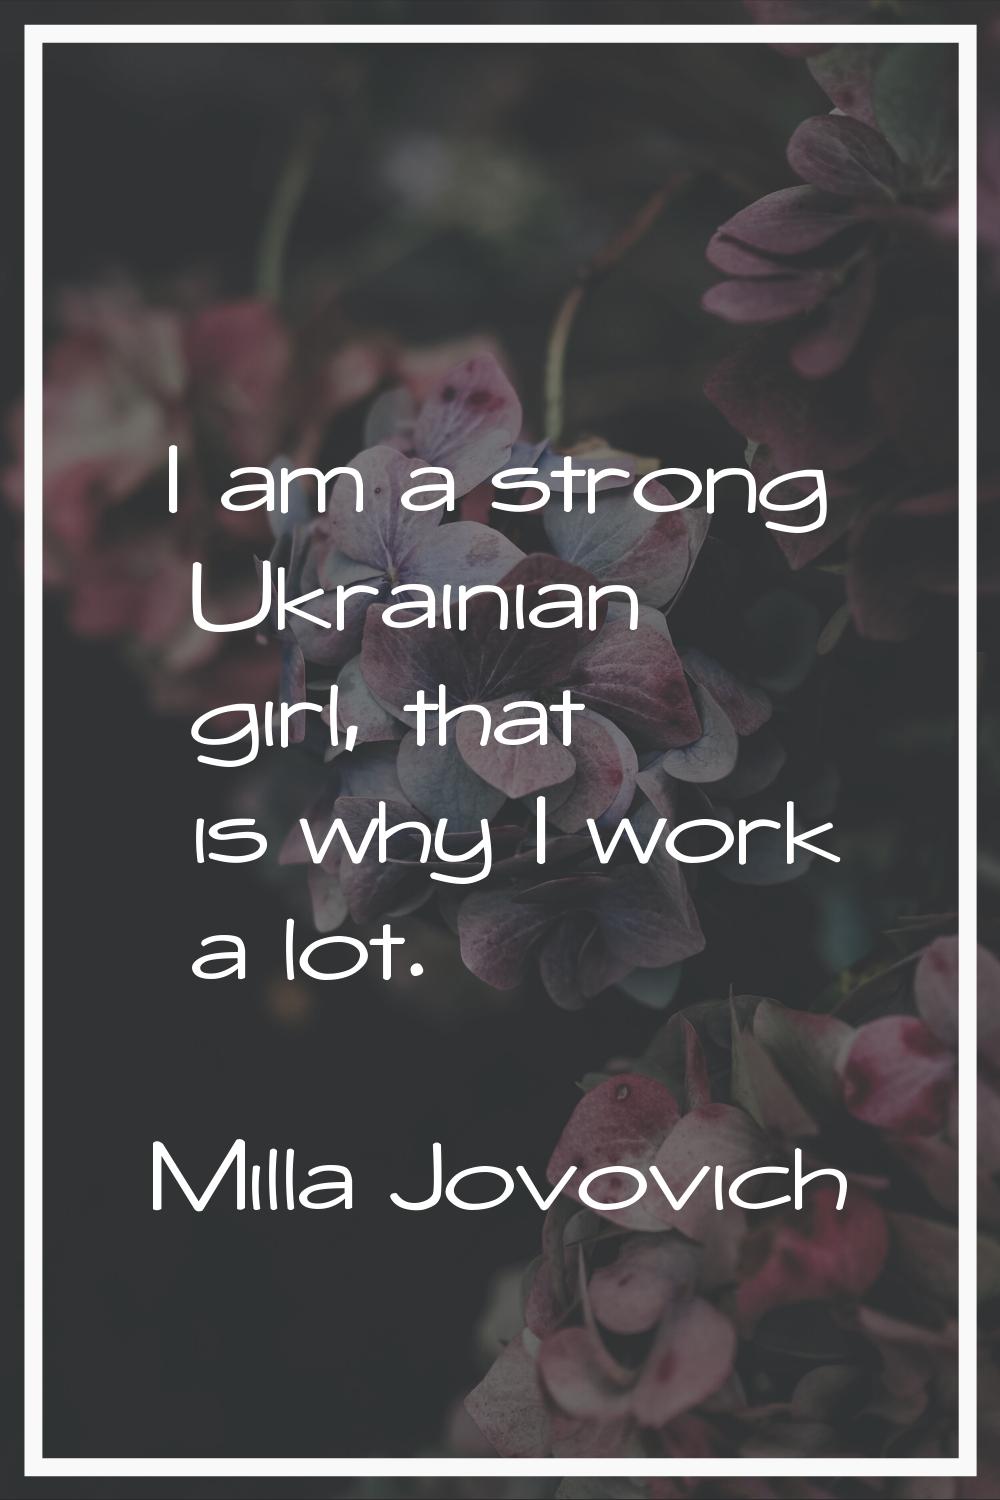 I am a strong Ukrainian girl, that is why I work a lot.